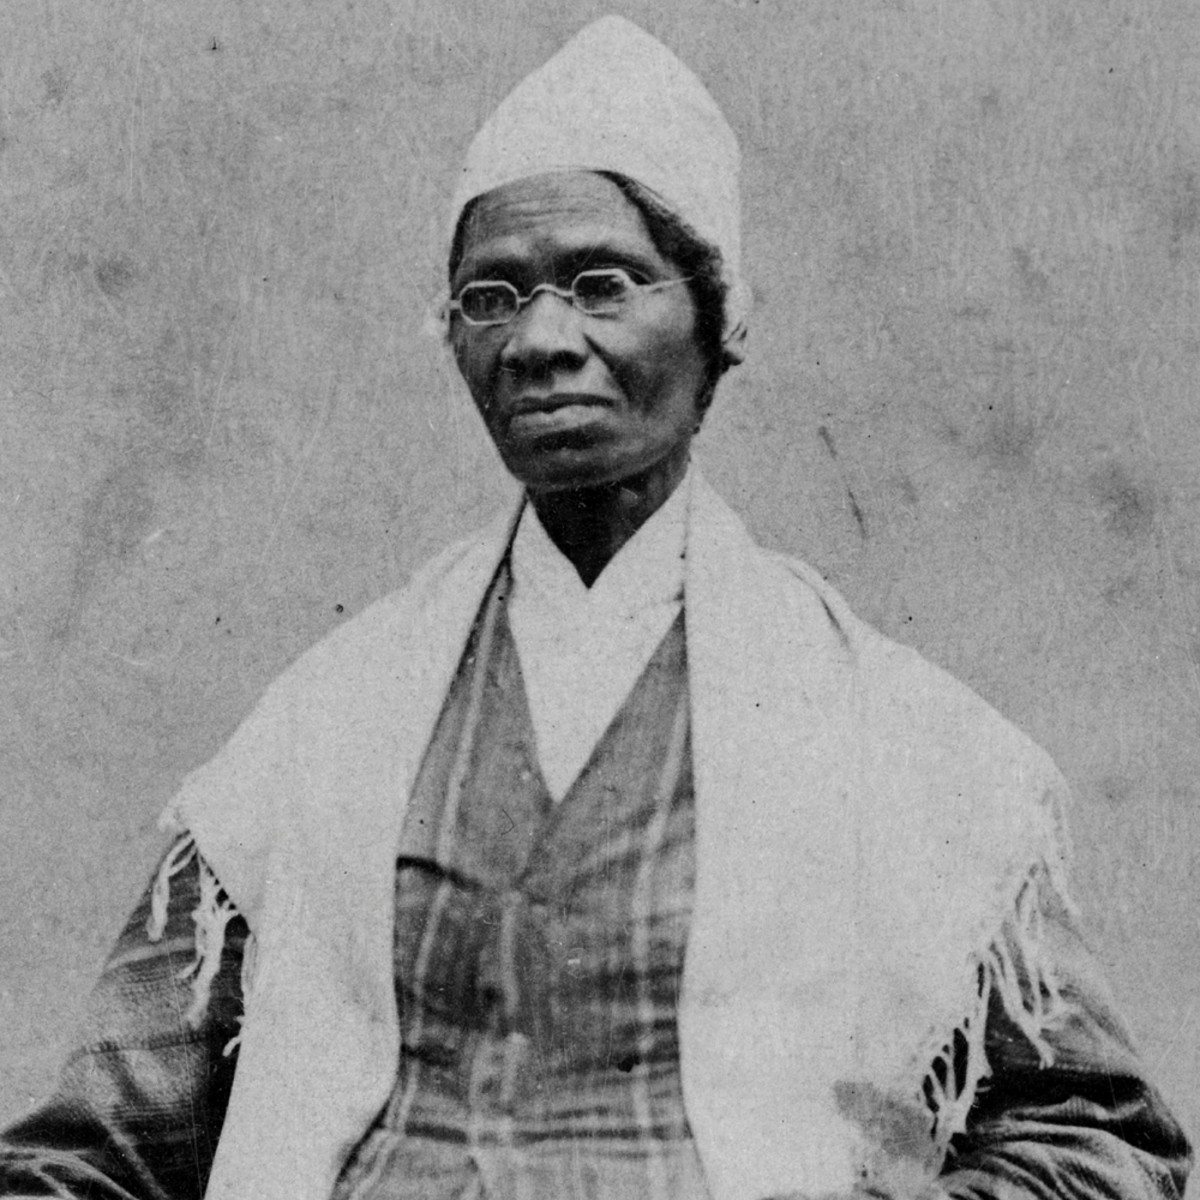 Ralph on The Life of Sojourner Truth